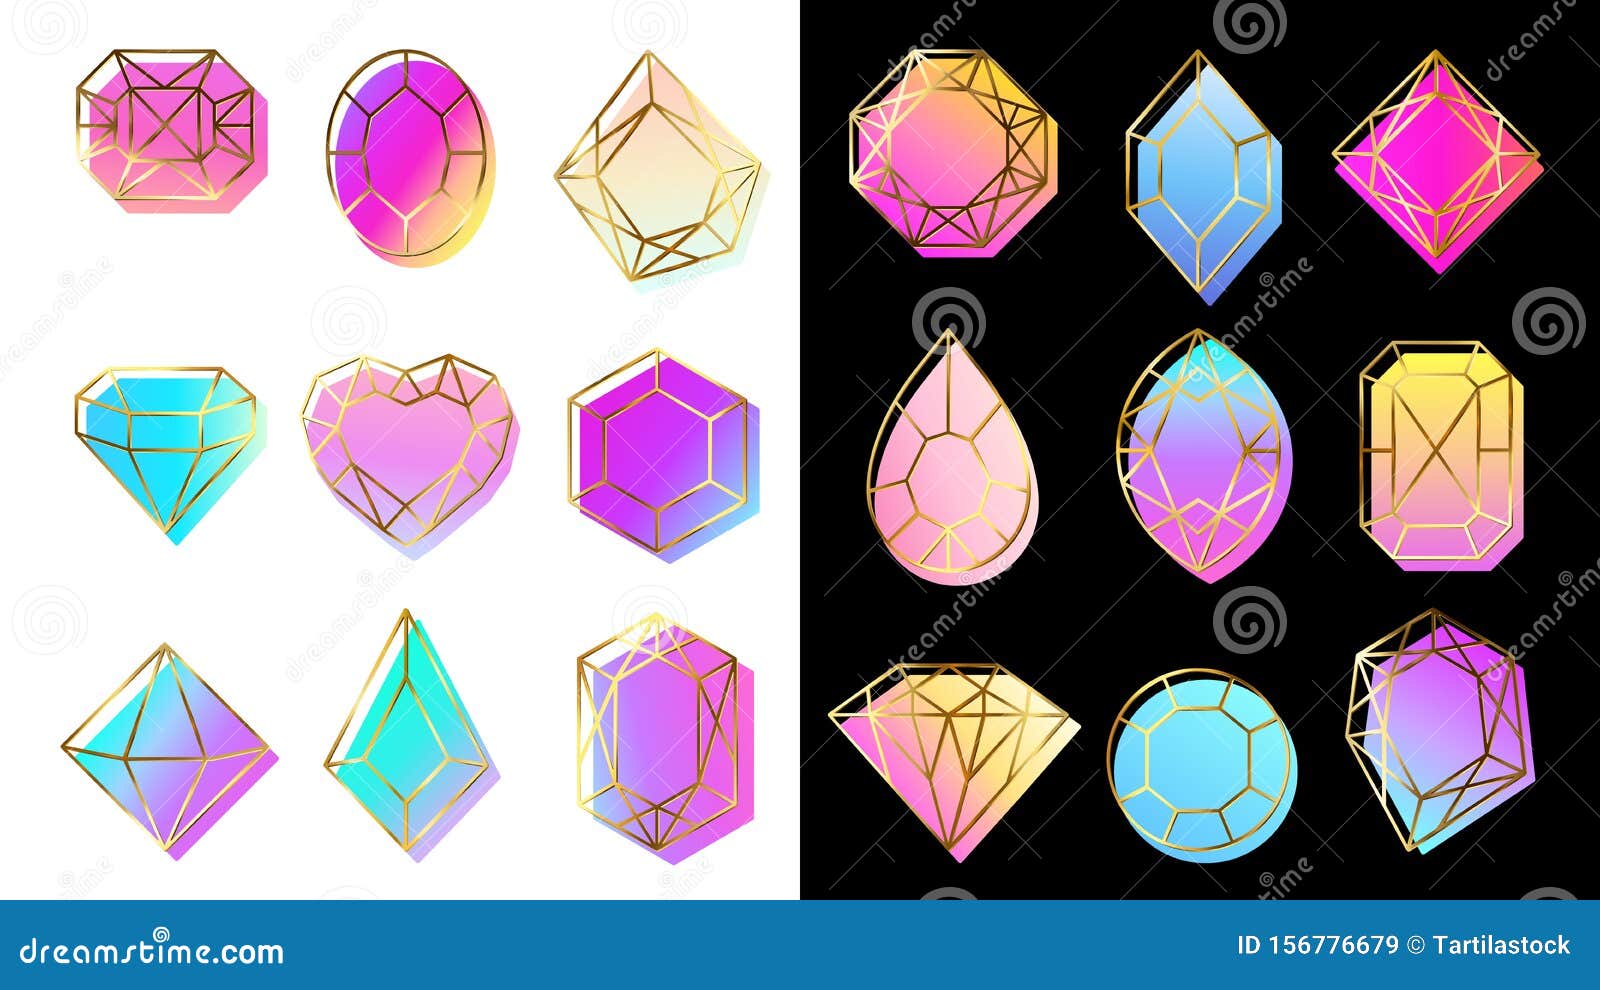 gems with gradients. jewelry stone, abstract colorful geometric s and trendy hipster diamond  s set